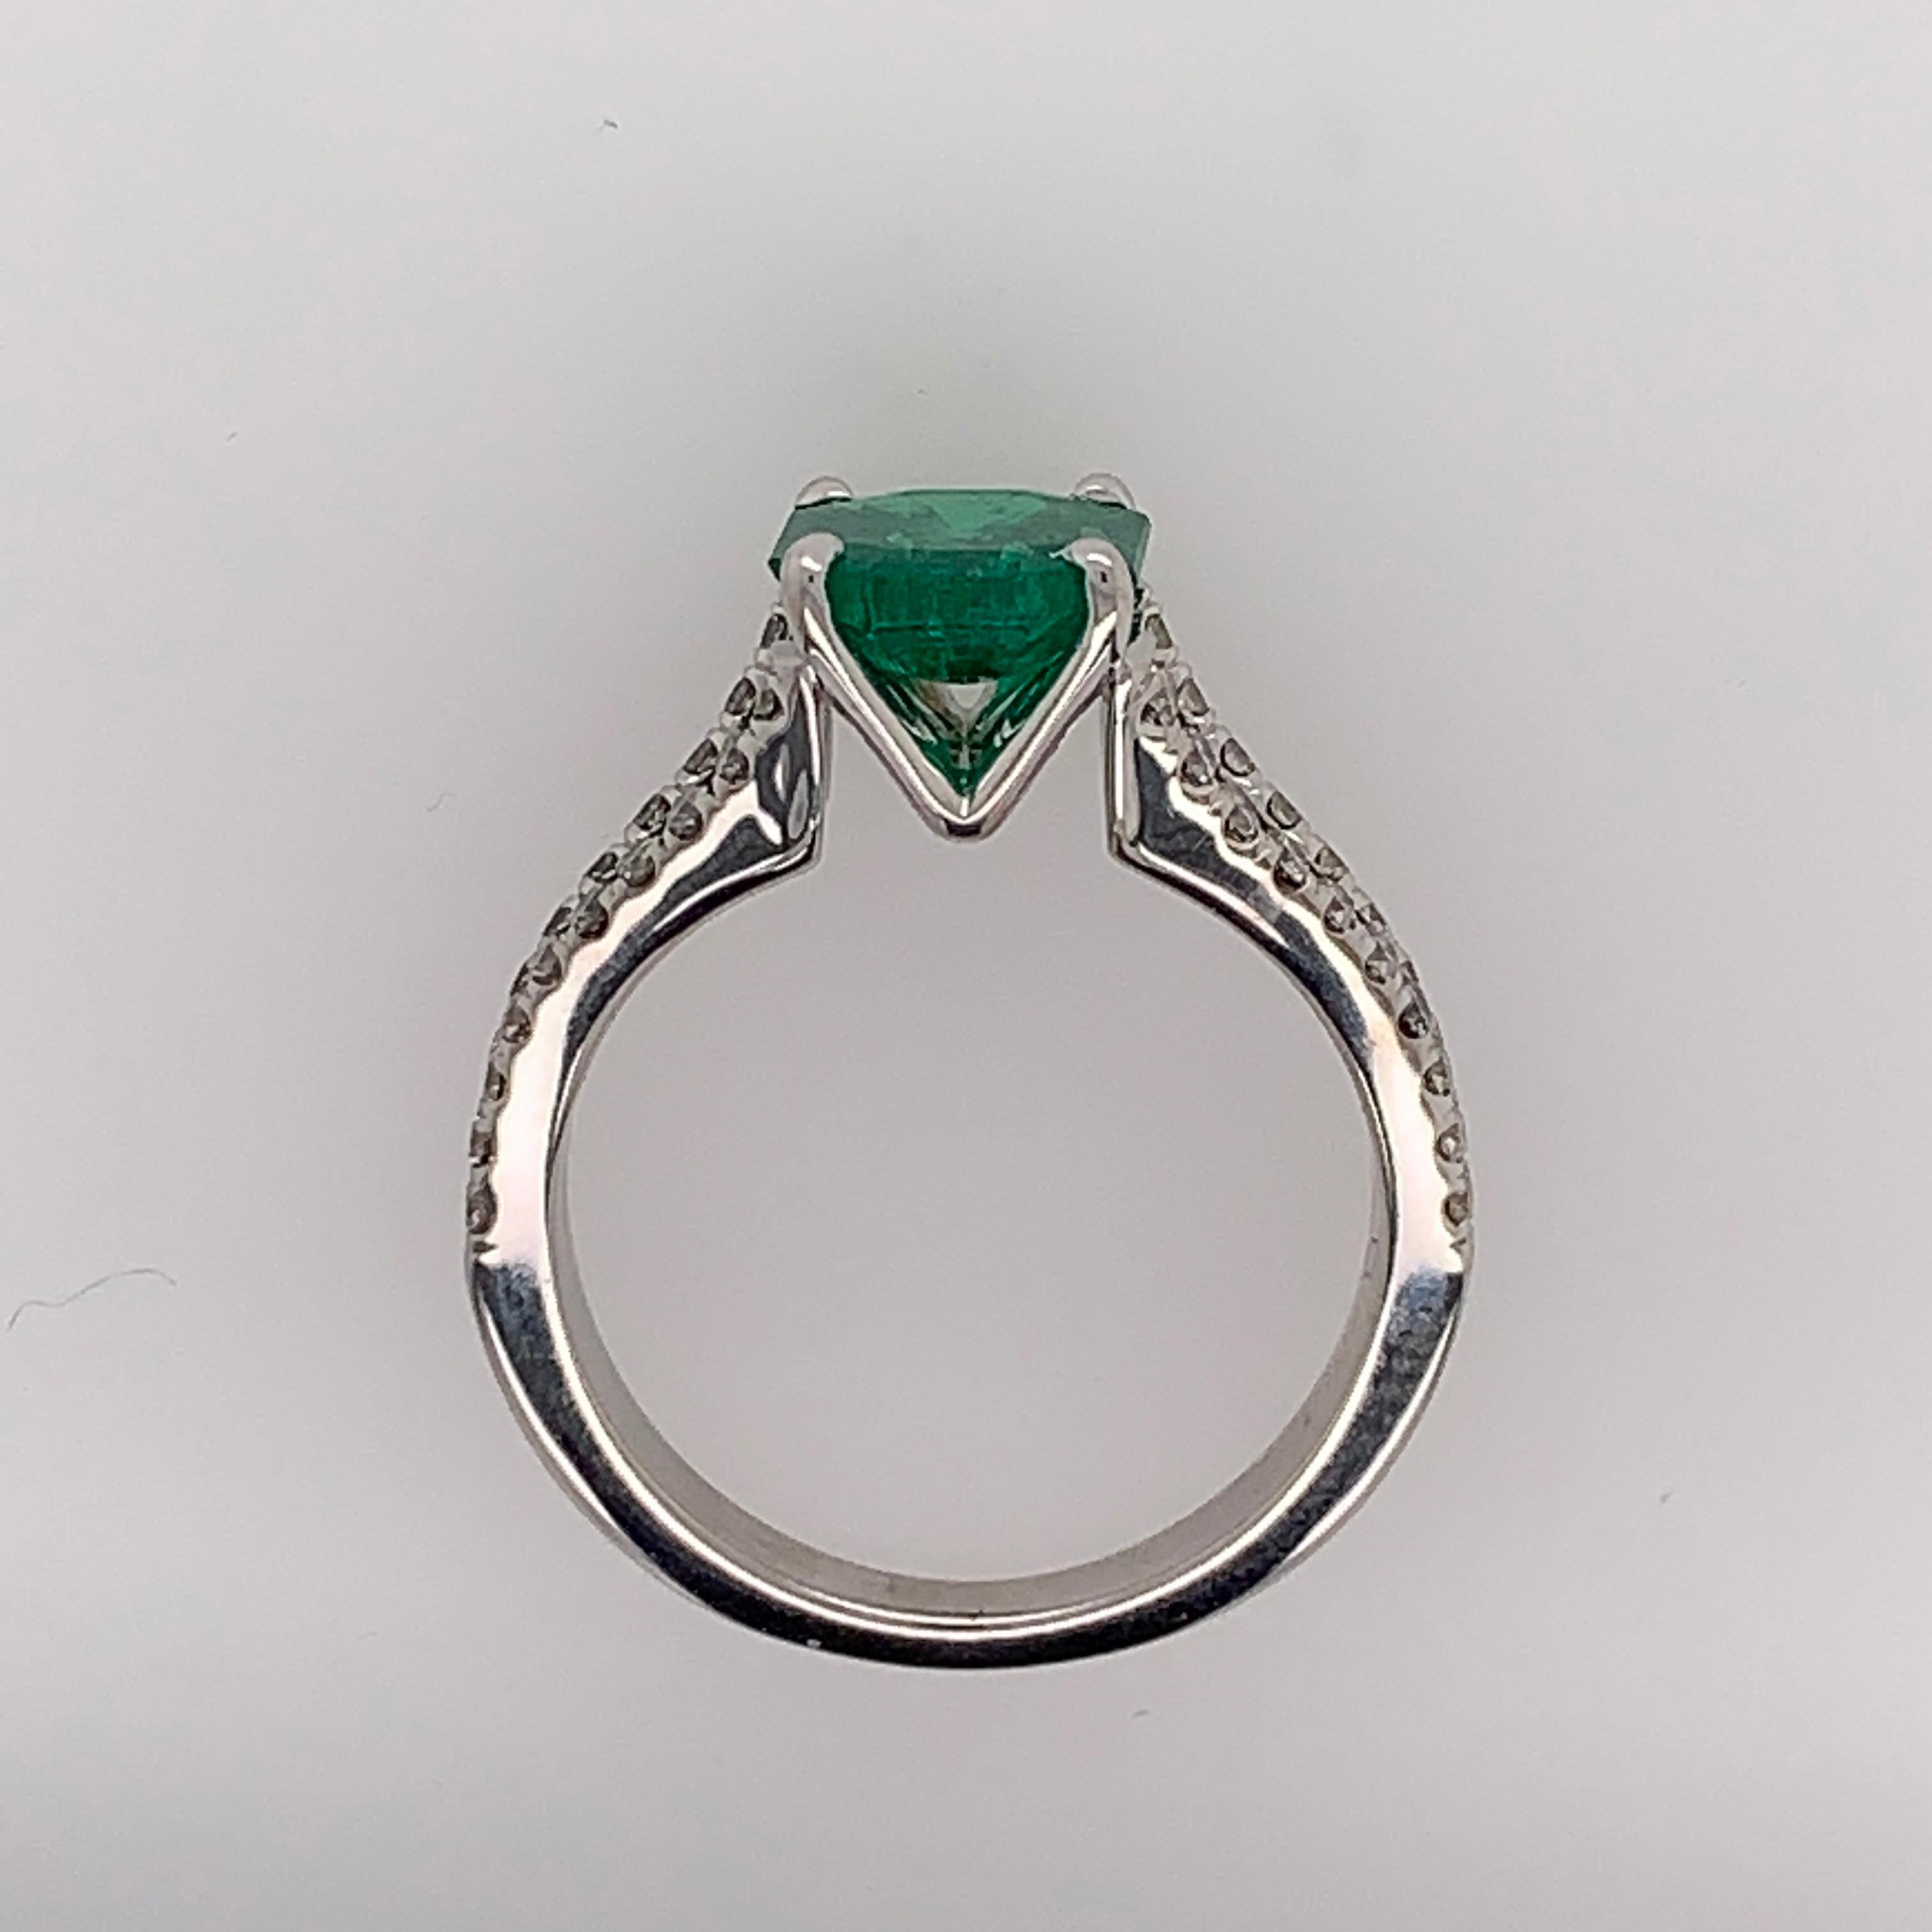 Emerald Cut White Gold 1.70 Carat Natural Green Emerald and Diamond Engagement Ring Gemstone